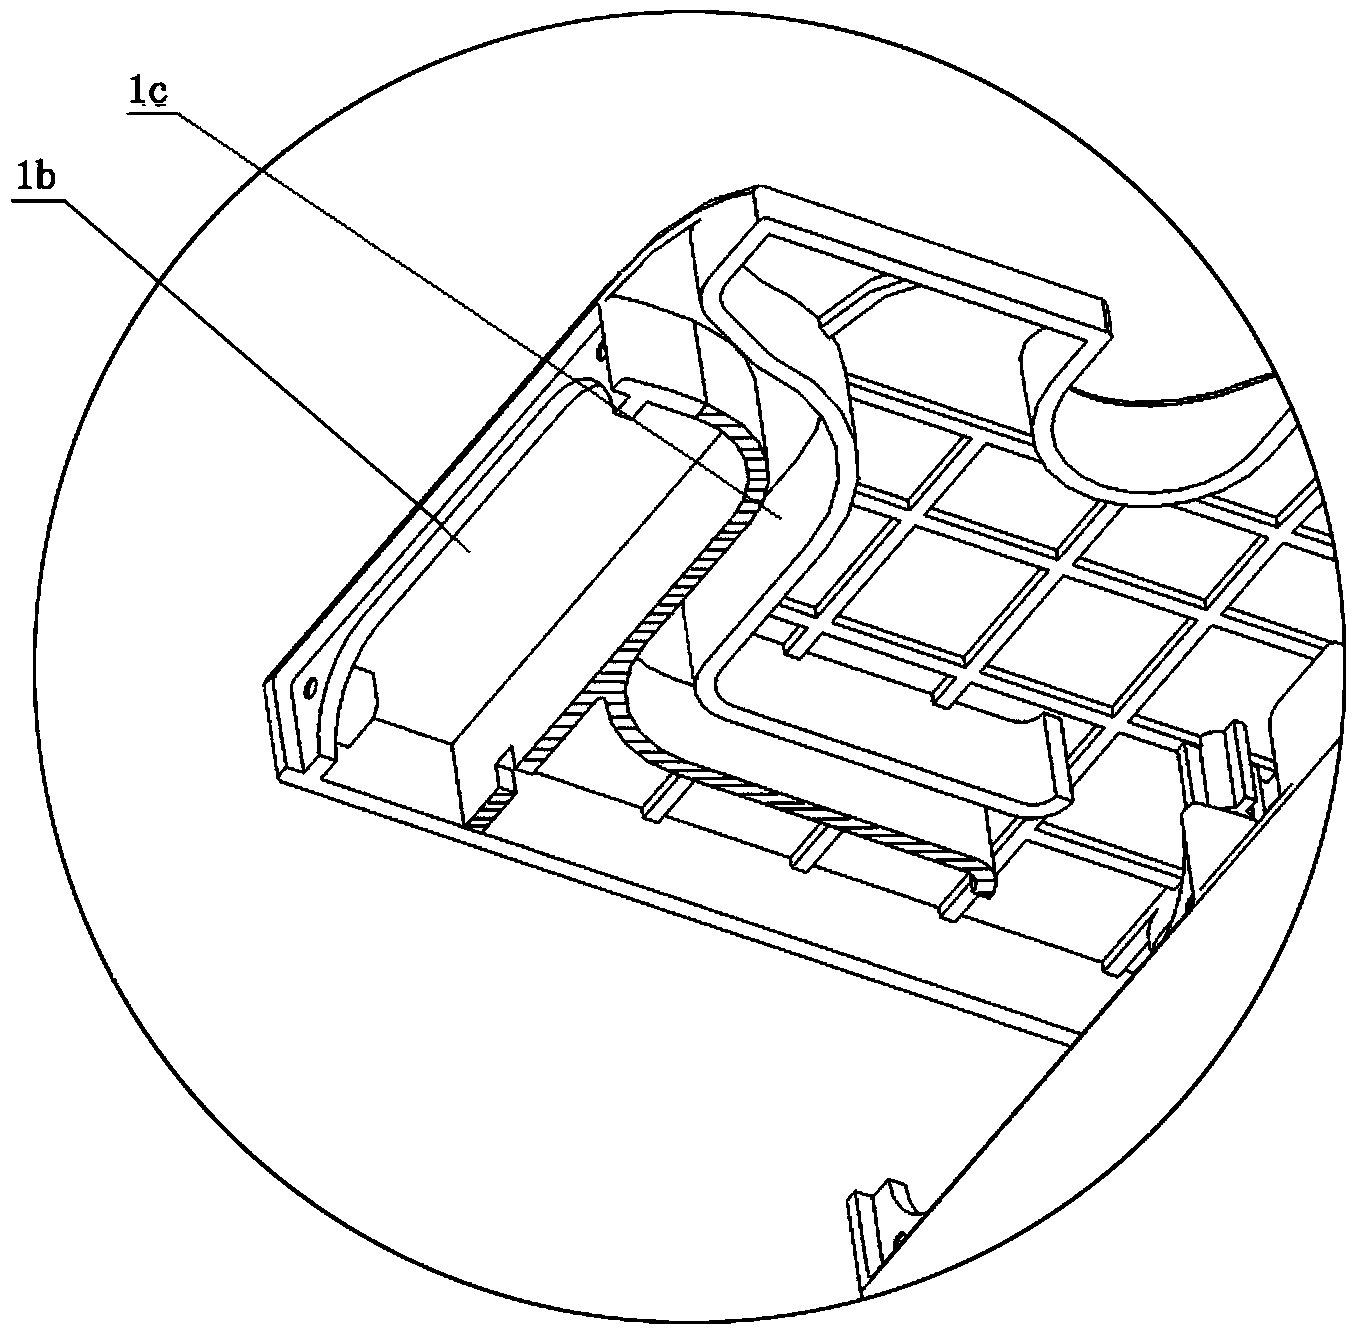 Multipoint excitation source sound box with radiating structure